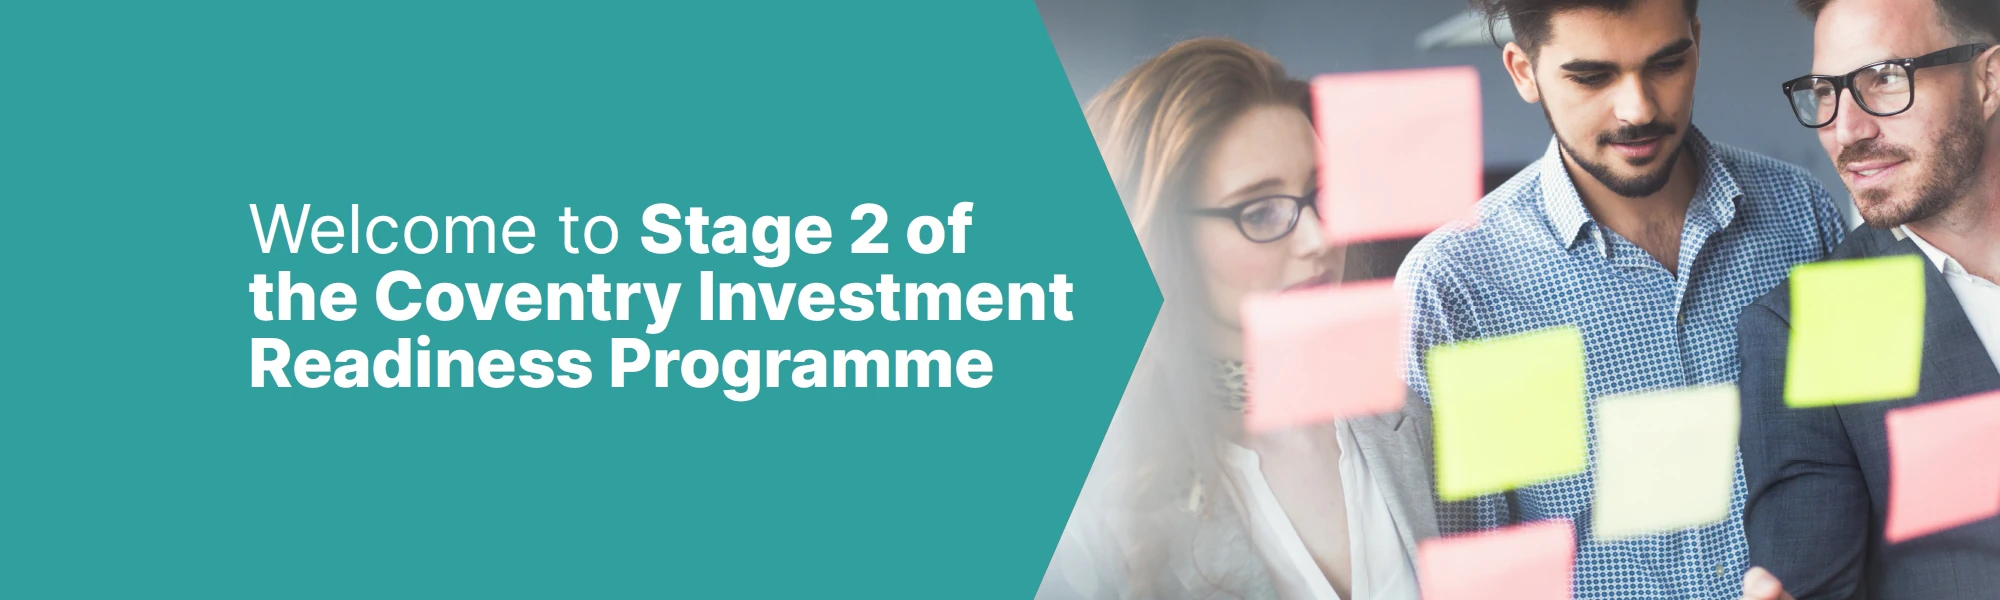 Coventry Investment Readiness Programme - Stage 2